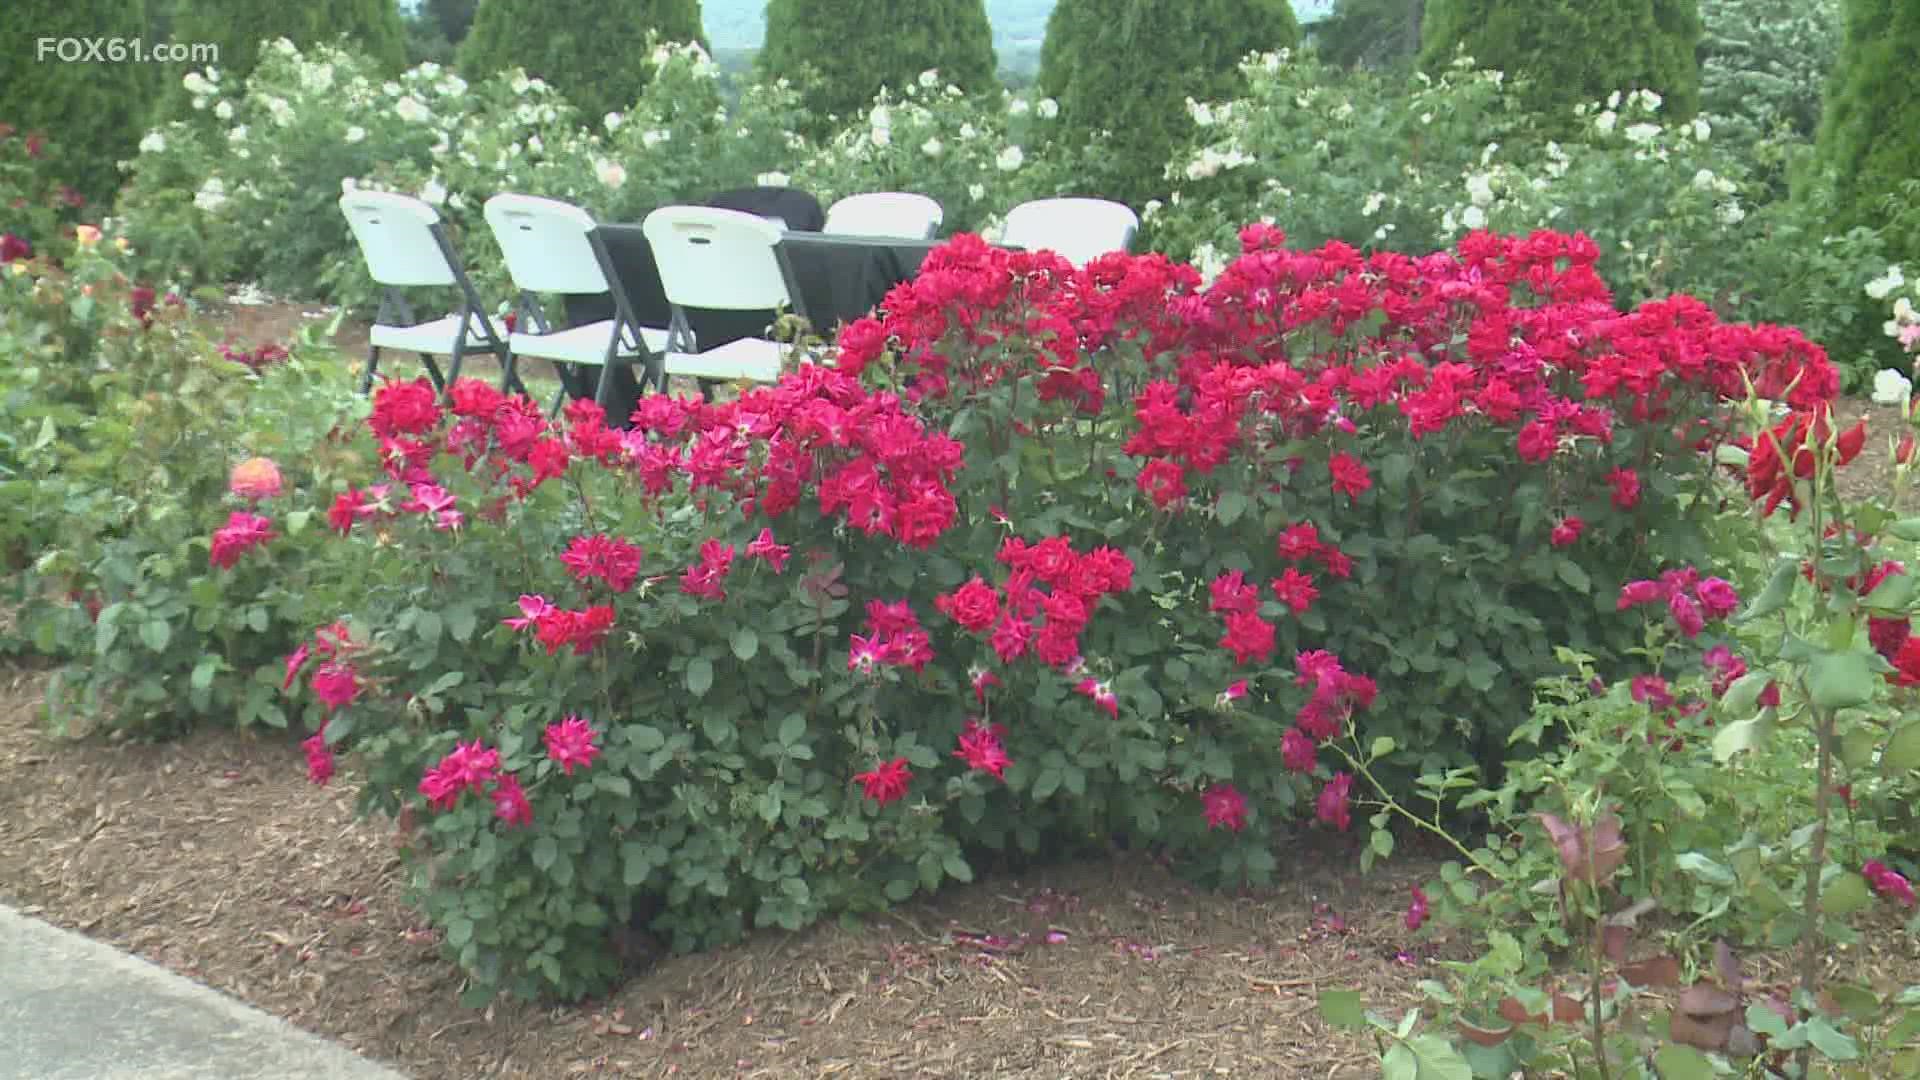 The 8th annual New Britain Rose Garden Festival attracted hundreds to Walnut Hill Park Saturday.